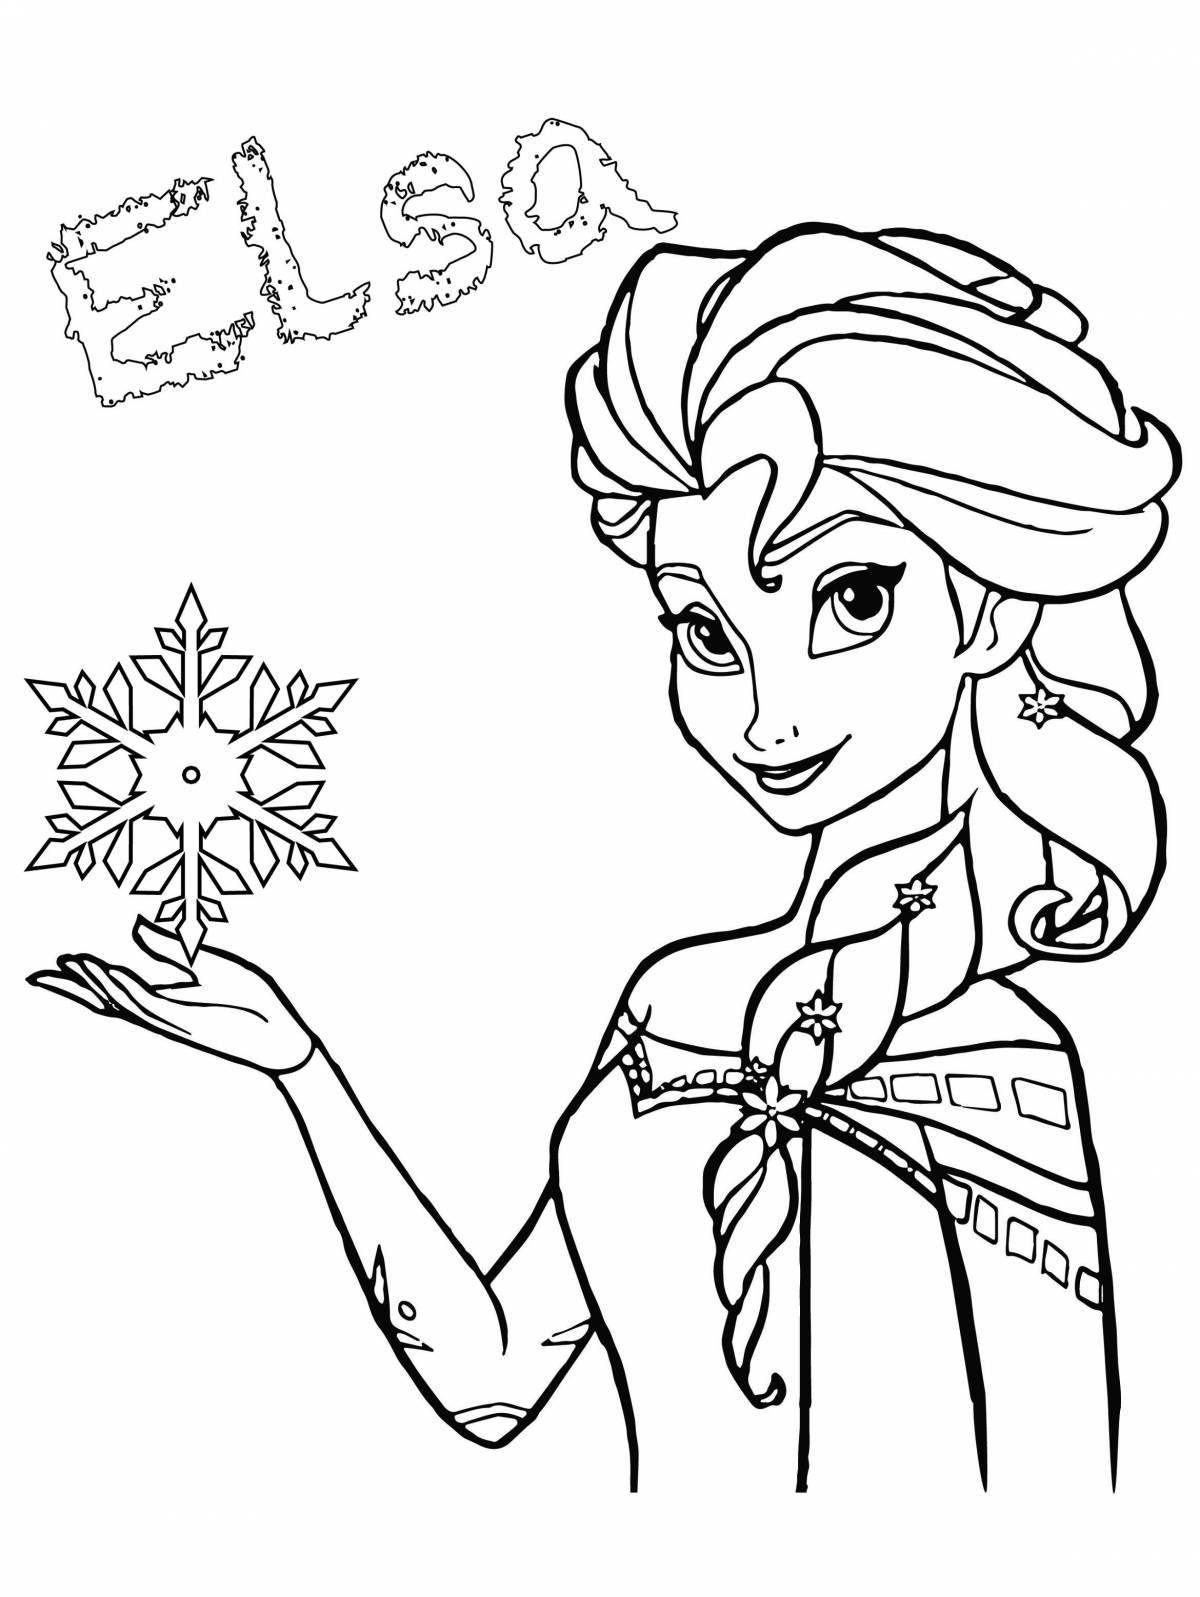 Elsa's charming face painting